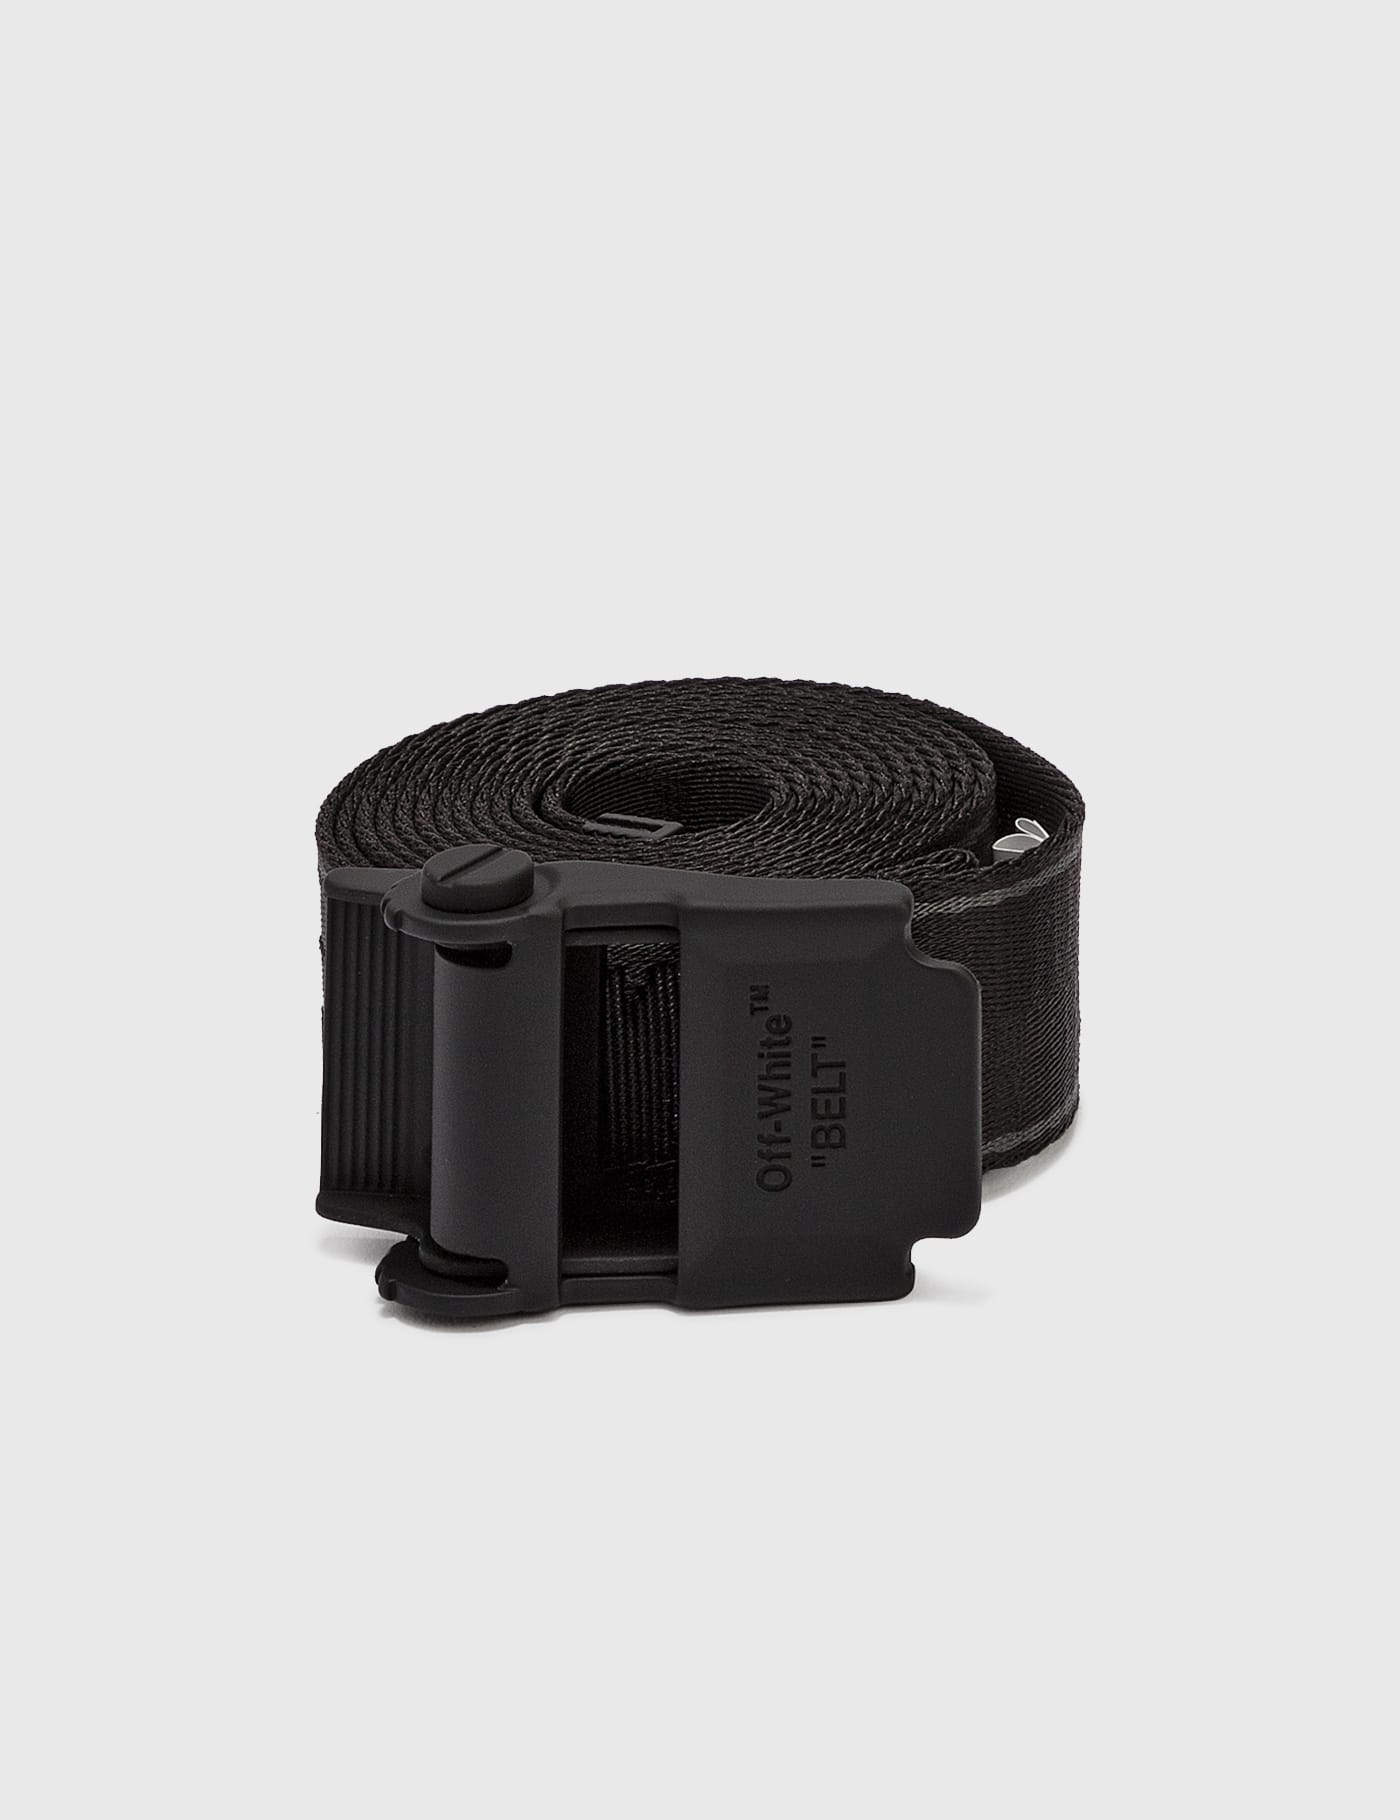 Off-White - Hybrid Industrial Belt | HBX - Globally Curated Fashion and  Lifestyle by Hypebeast